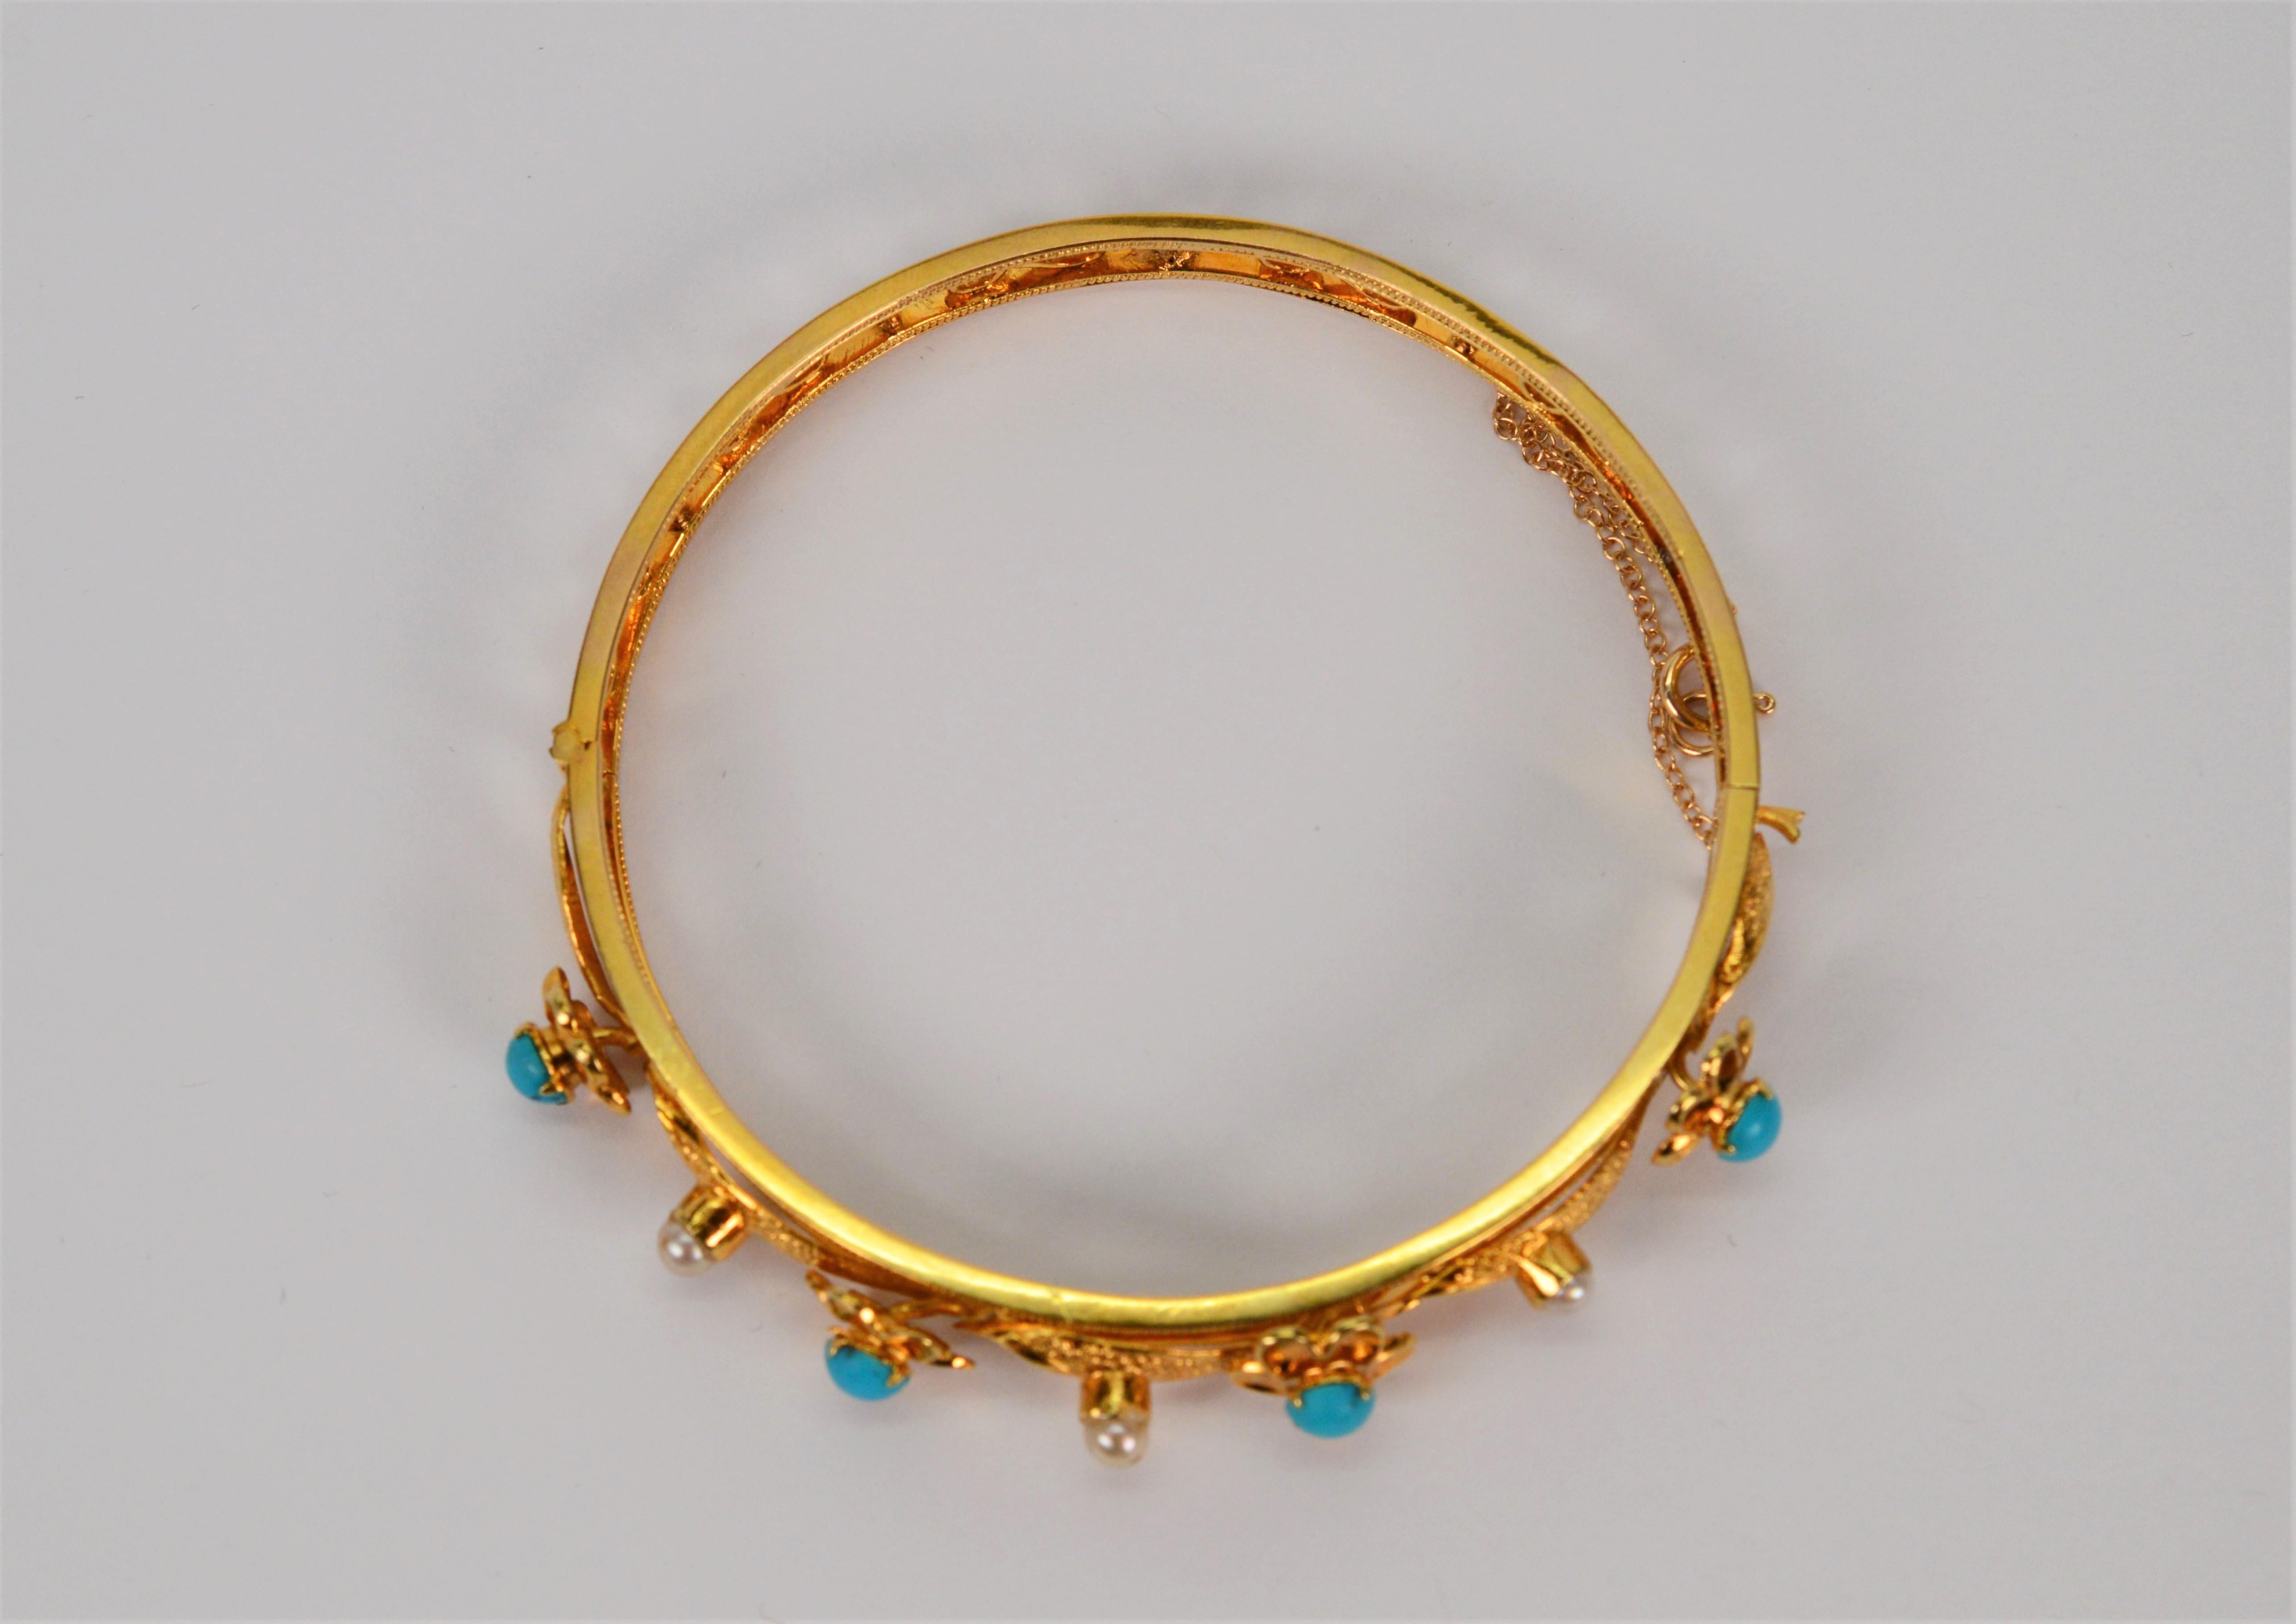 14 Karat Yellow Gold Filigree Bangle Bracelet with Turquoise and Pearl Accents 1